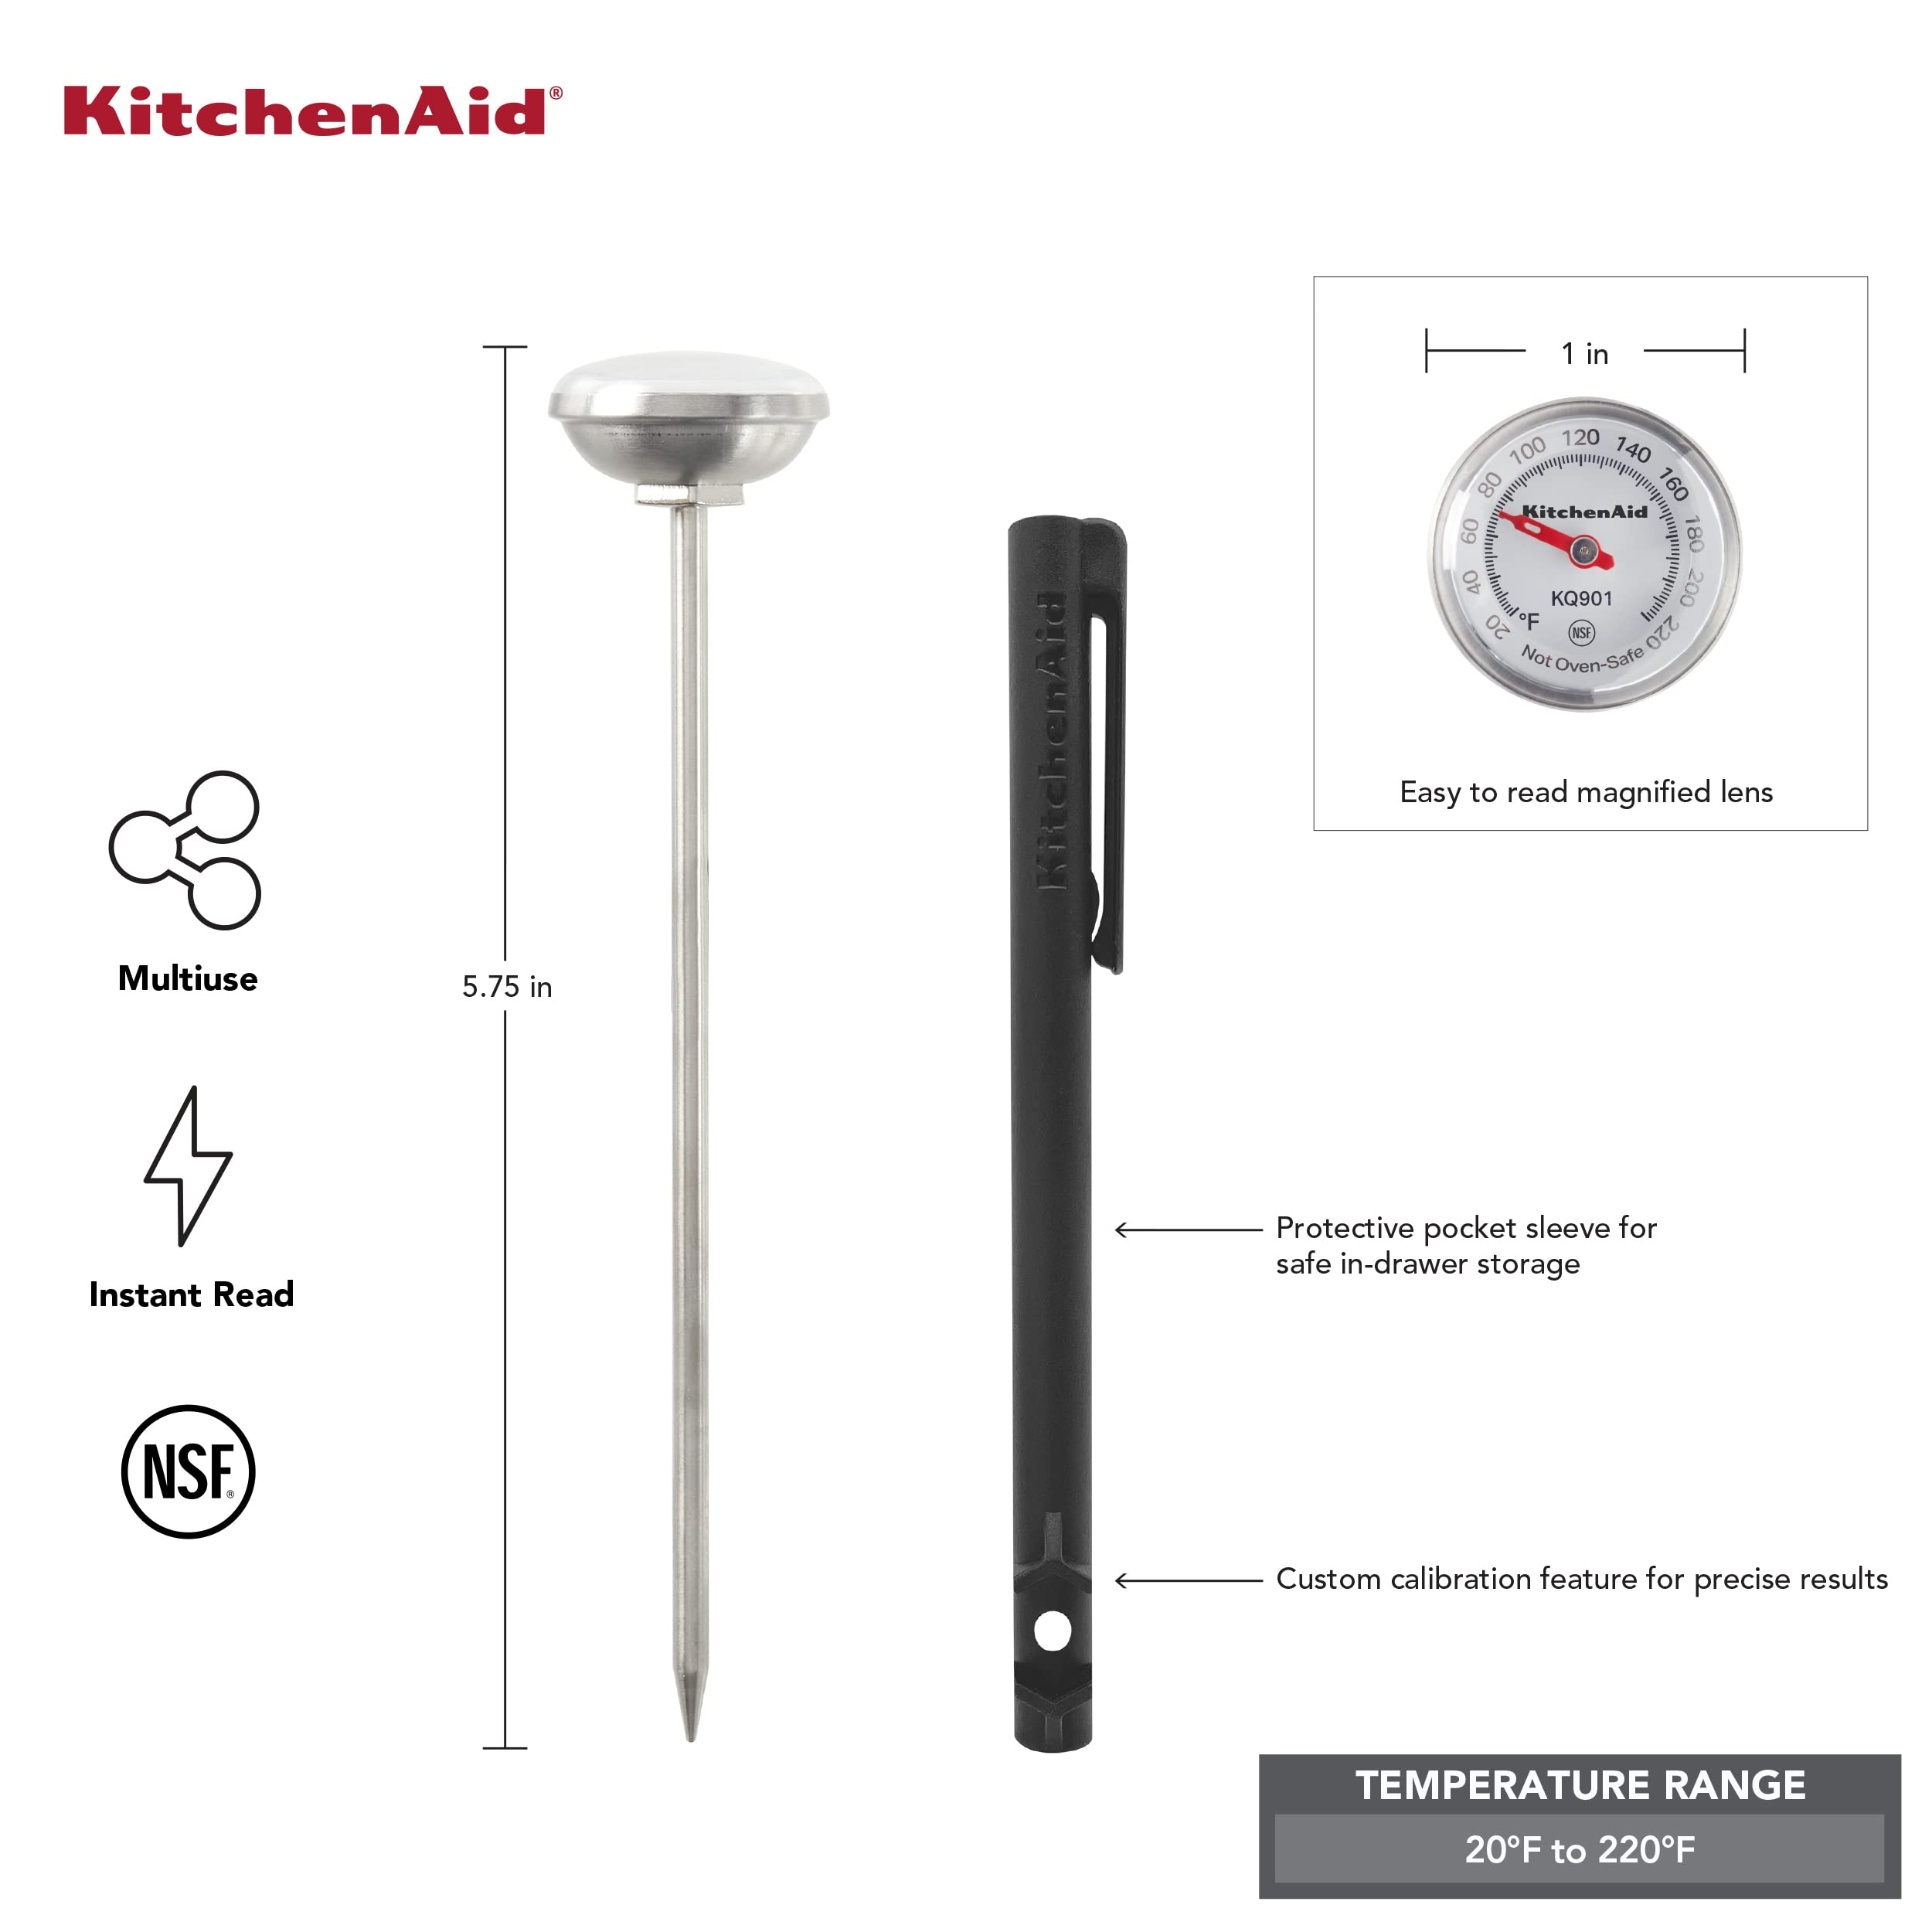 KitchenAid KQ901 Instant Read Food Thermometer for Kitchen or Grill, TEMPERATURE RANGE: 20F to 220F, 1 inch dial, Black